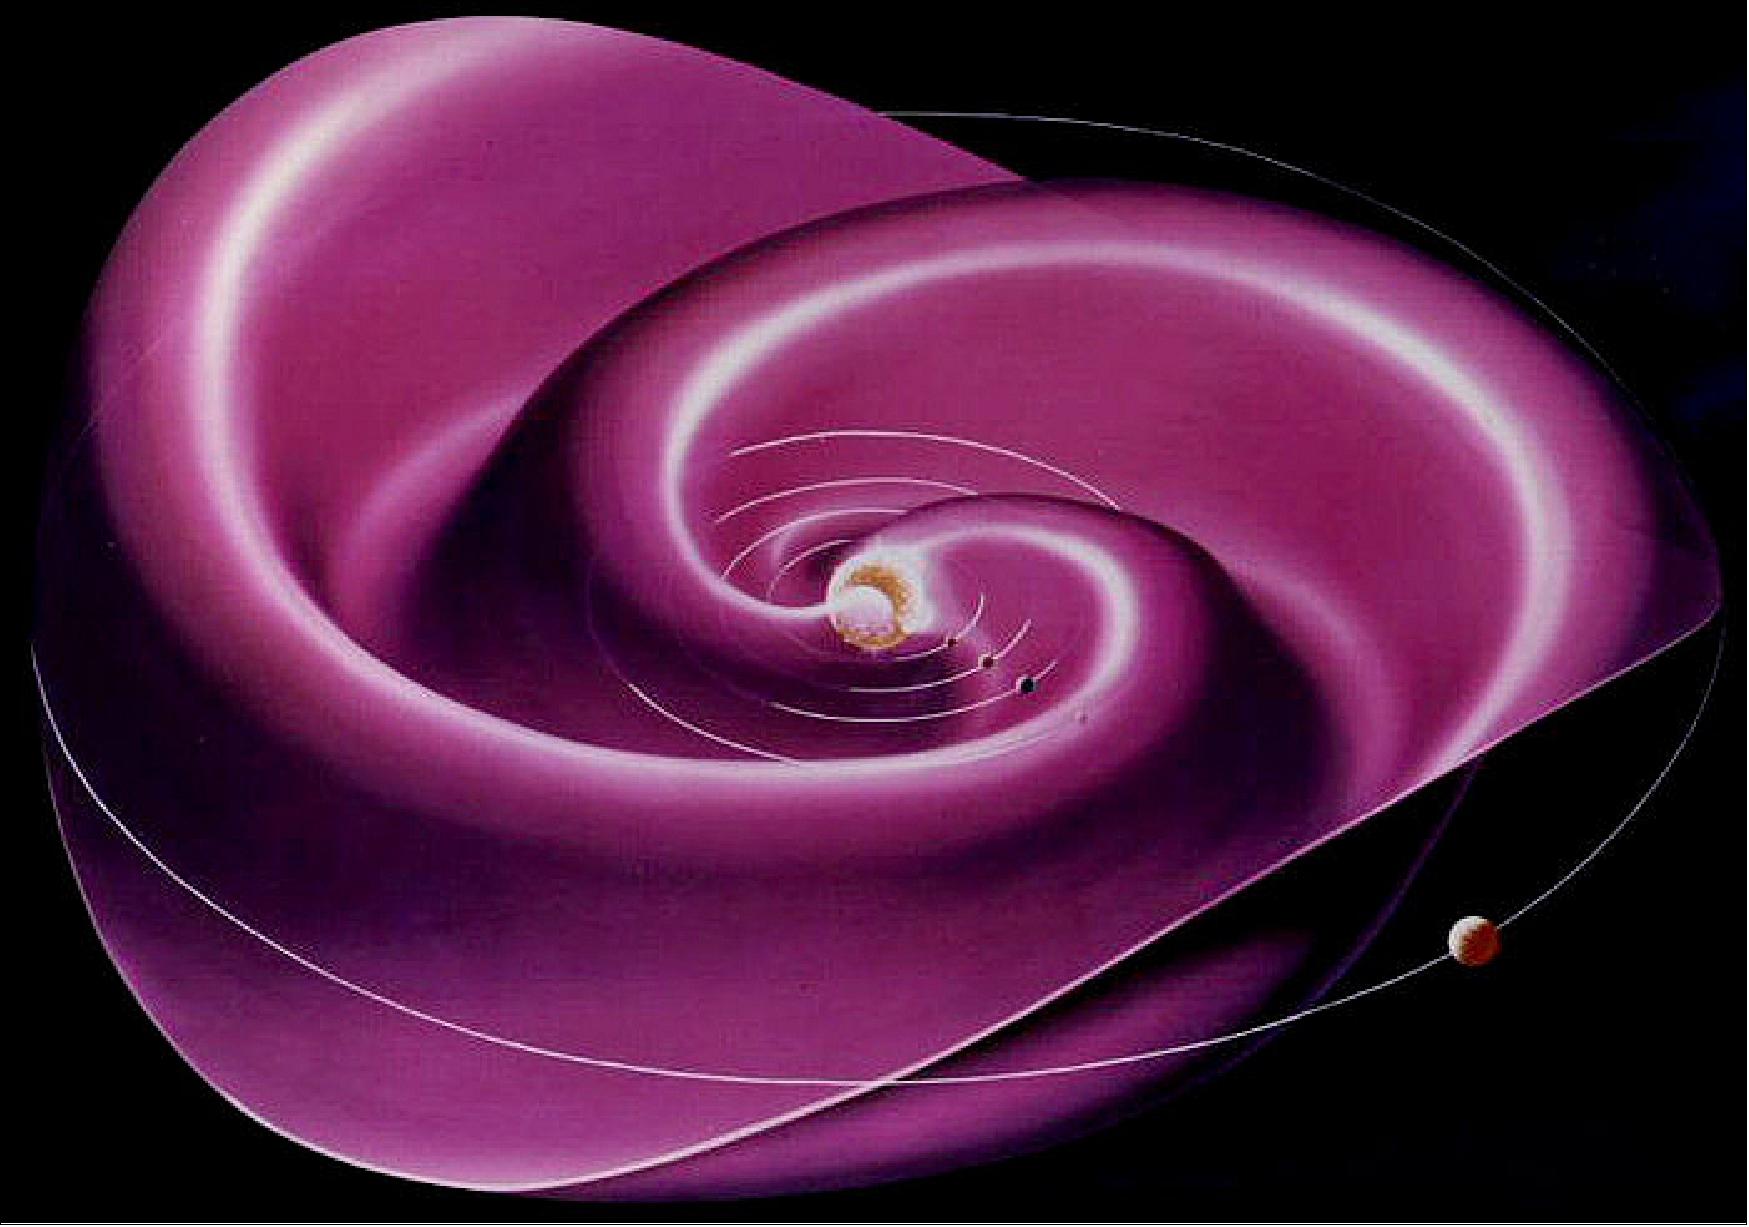 Figure 13: The heliospheric current sheet, the largest structure in the Solar System, results from the influence of the Sun's rotating magnetic field on the plasma in the interplanetary medium, known as the solar wind. The wavy spiral shape of the ensuing 'Parker spiral' has been likened to a ballerina's skirt (image credit: NASA – Werner Heil)